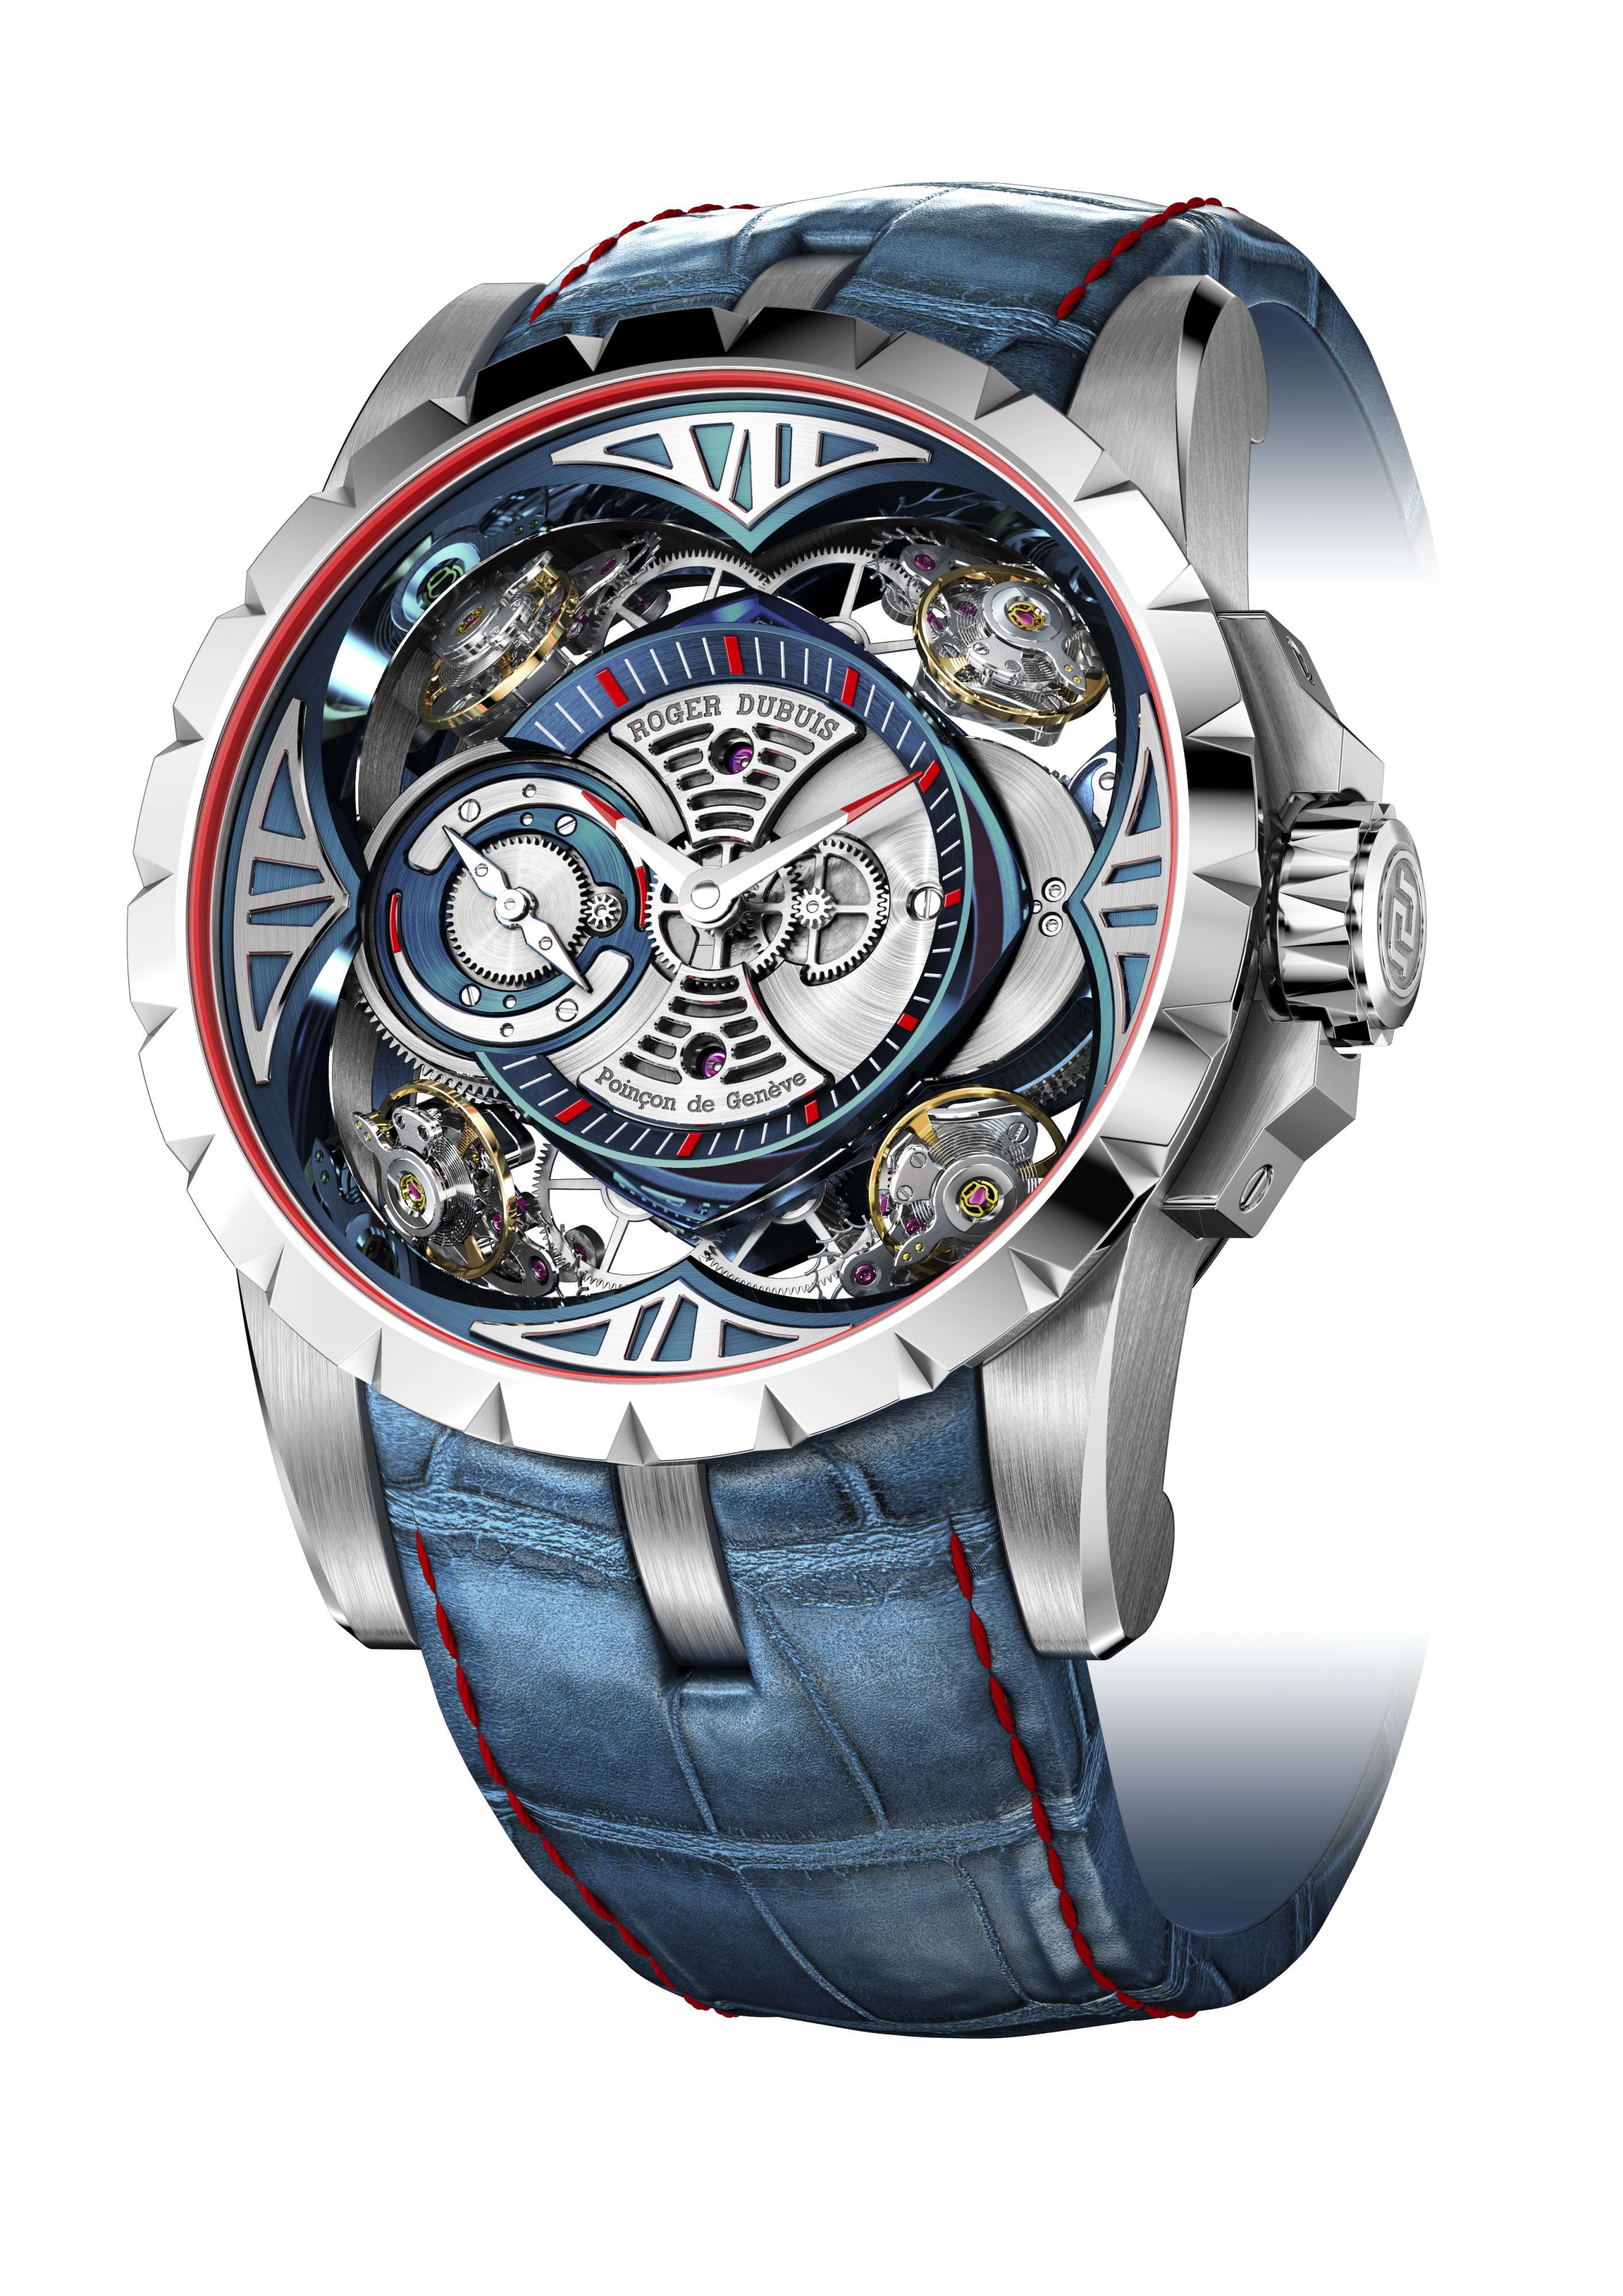 Roger Dubuis Excalibur Quatuor has been updated with a new material – cobalt chrome